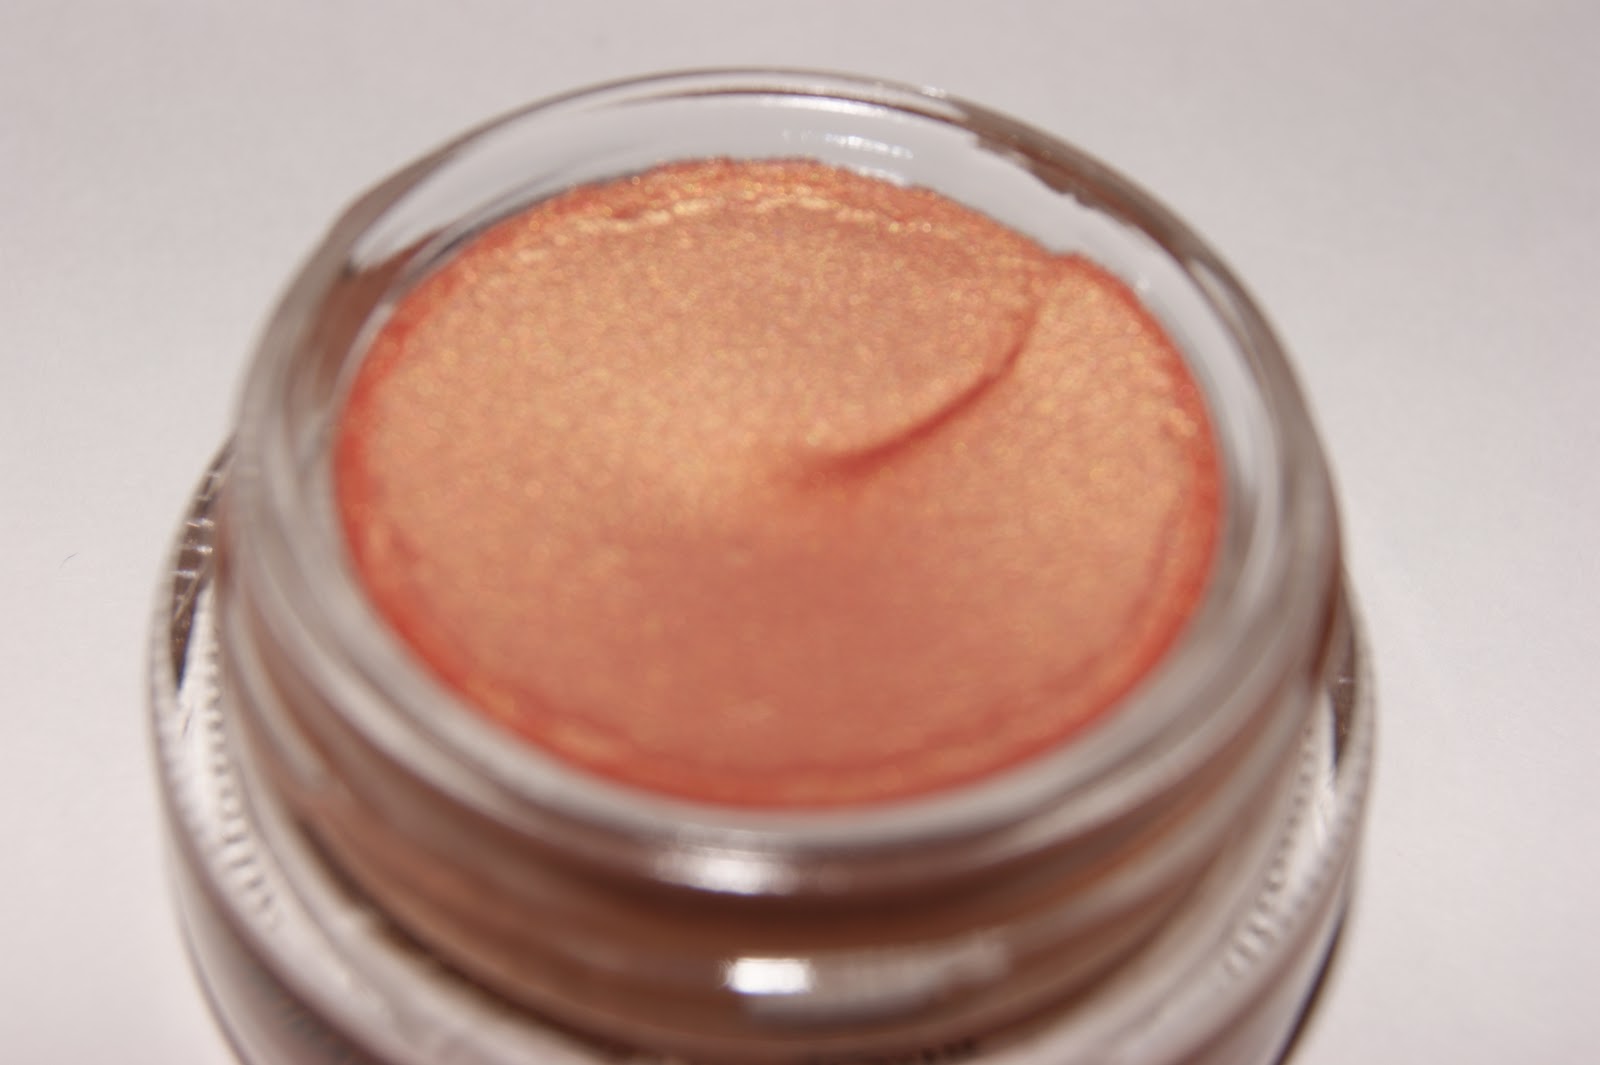 MAC Paint Pots: Painterly, Layin' Low, Groundwork - brittny!